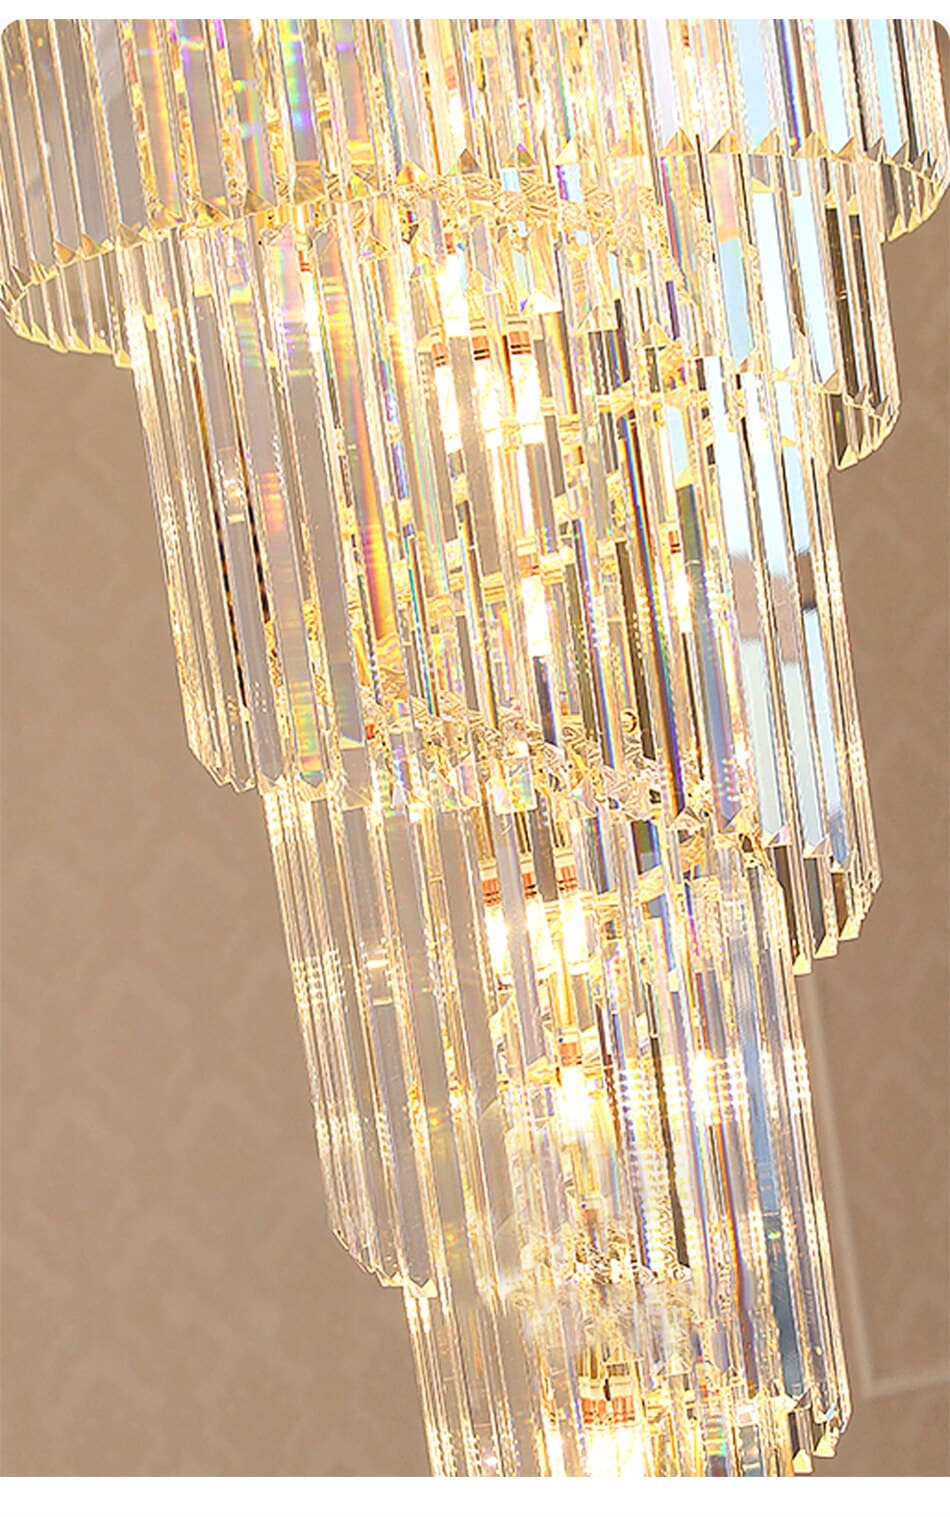 Chandelier in the Hall Living Room Top Long Smoky Gray Crystal Lamps Gold Staircase Lighting Illuminator